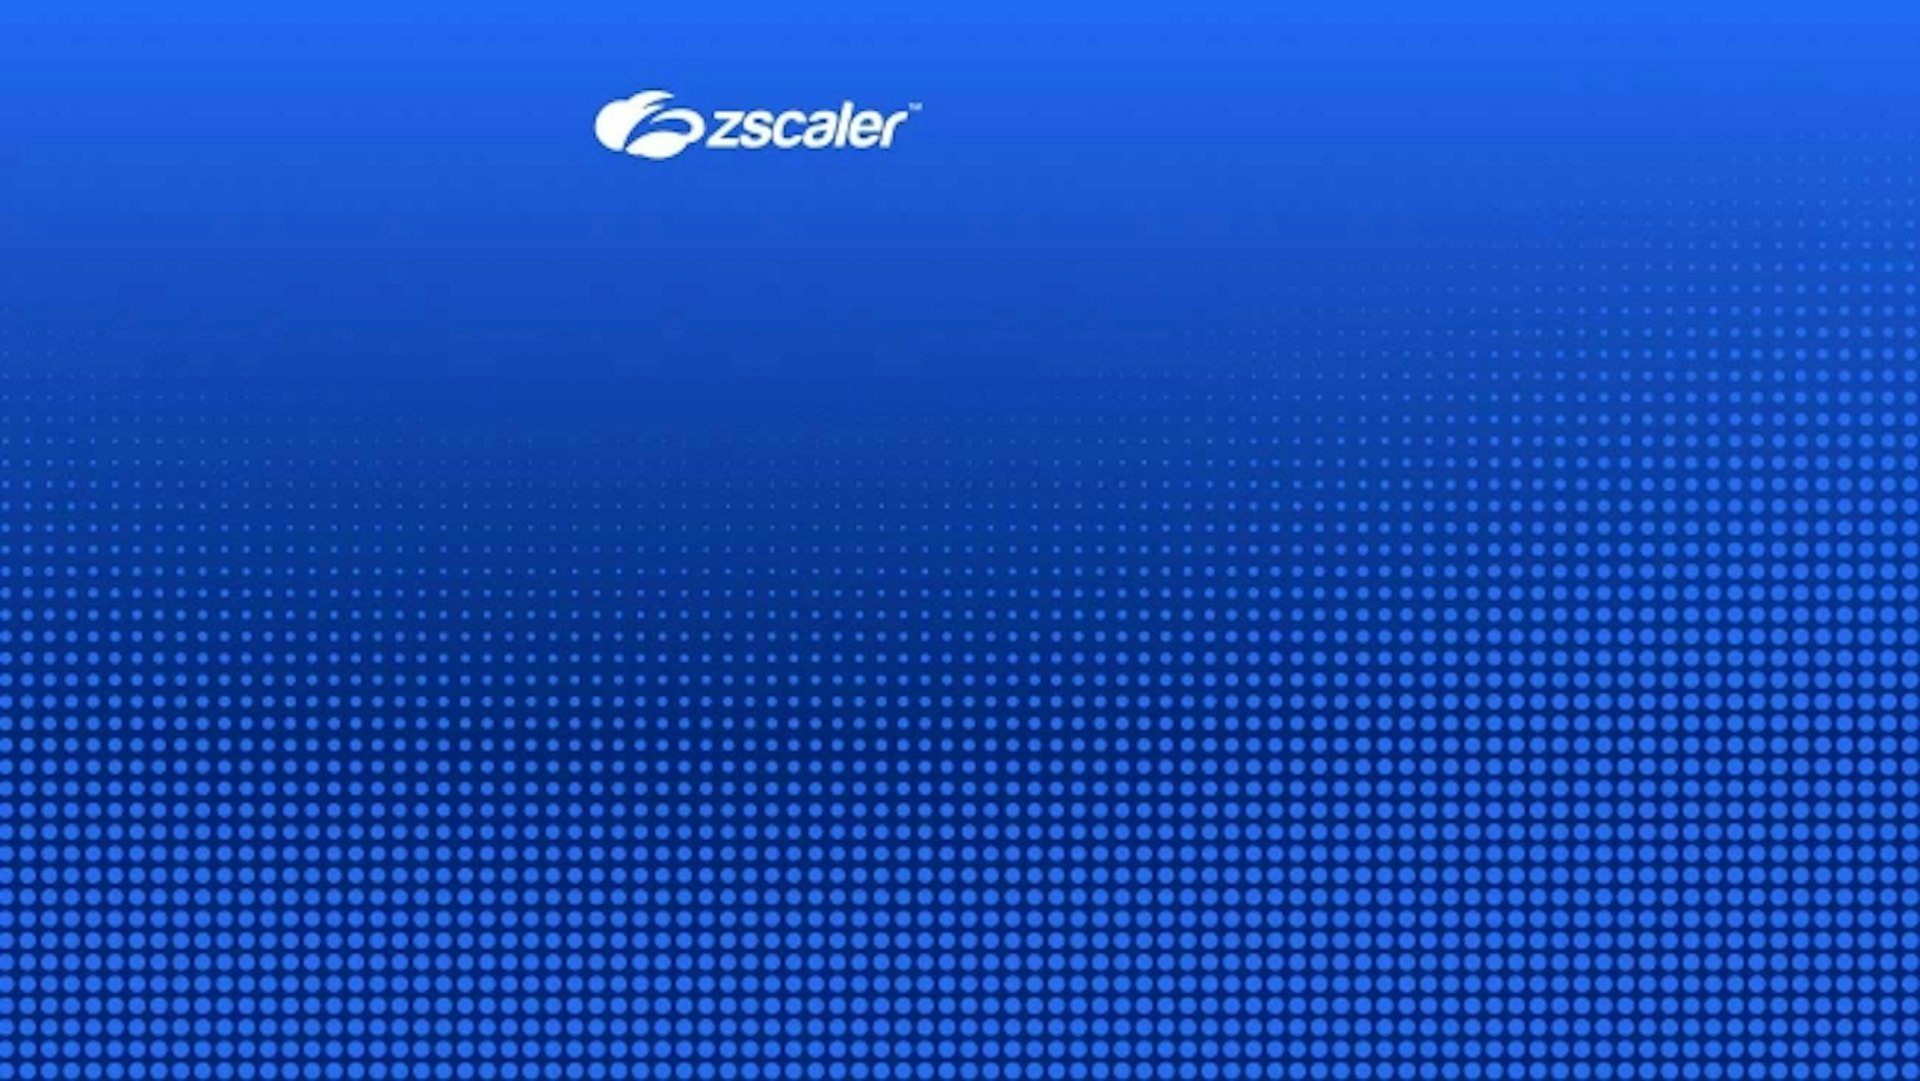 Zscaler Data Protection: Exact Data Match